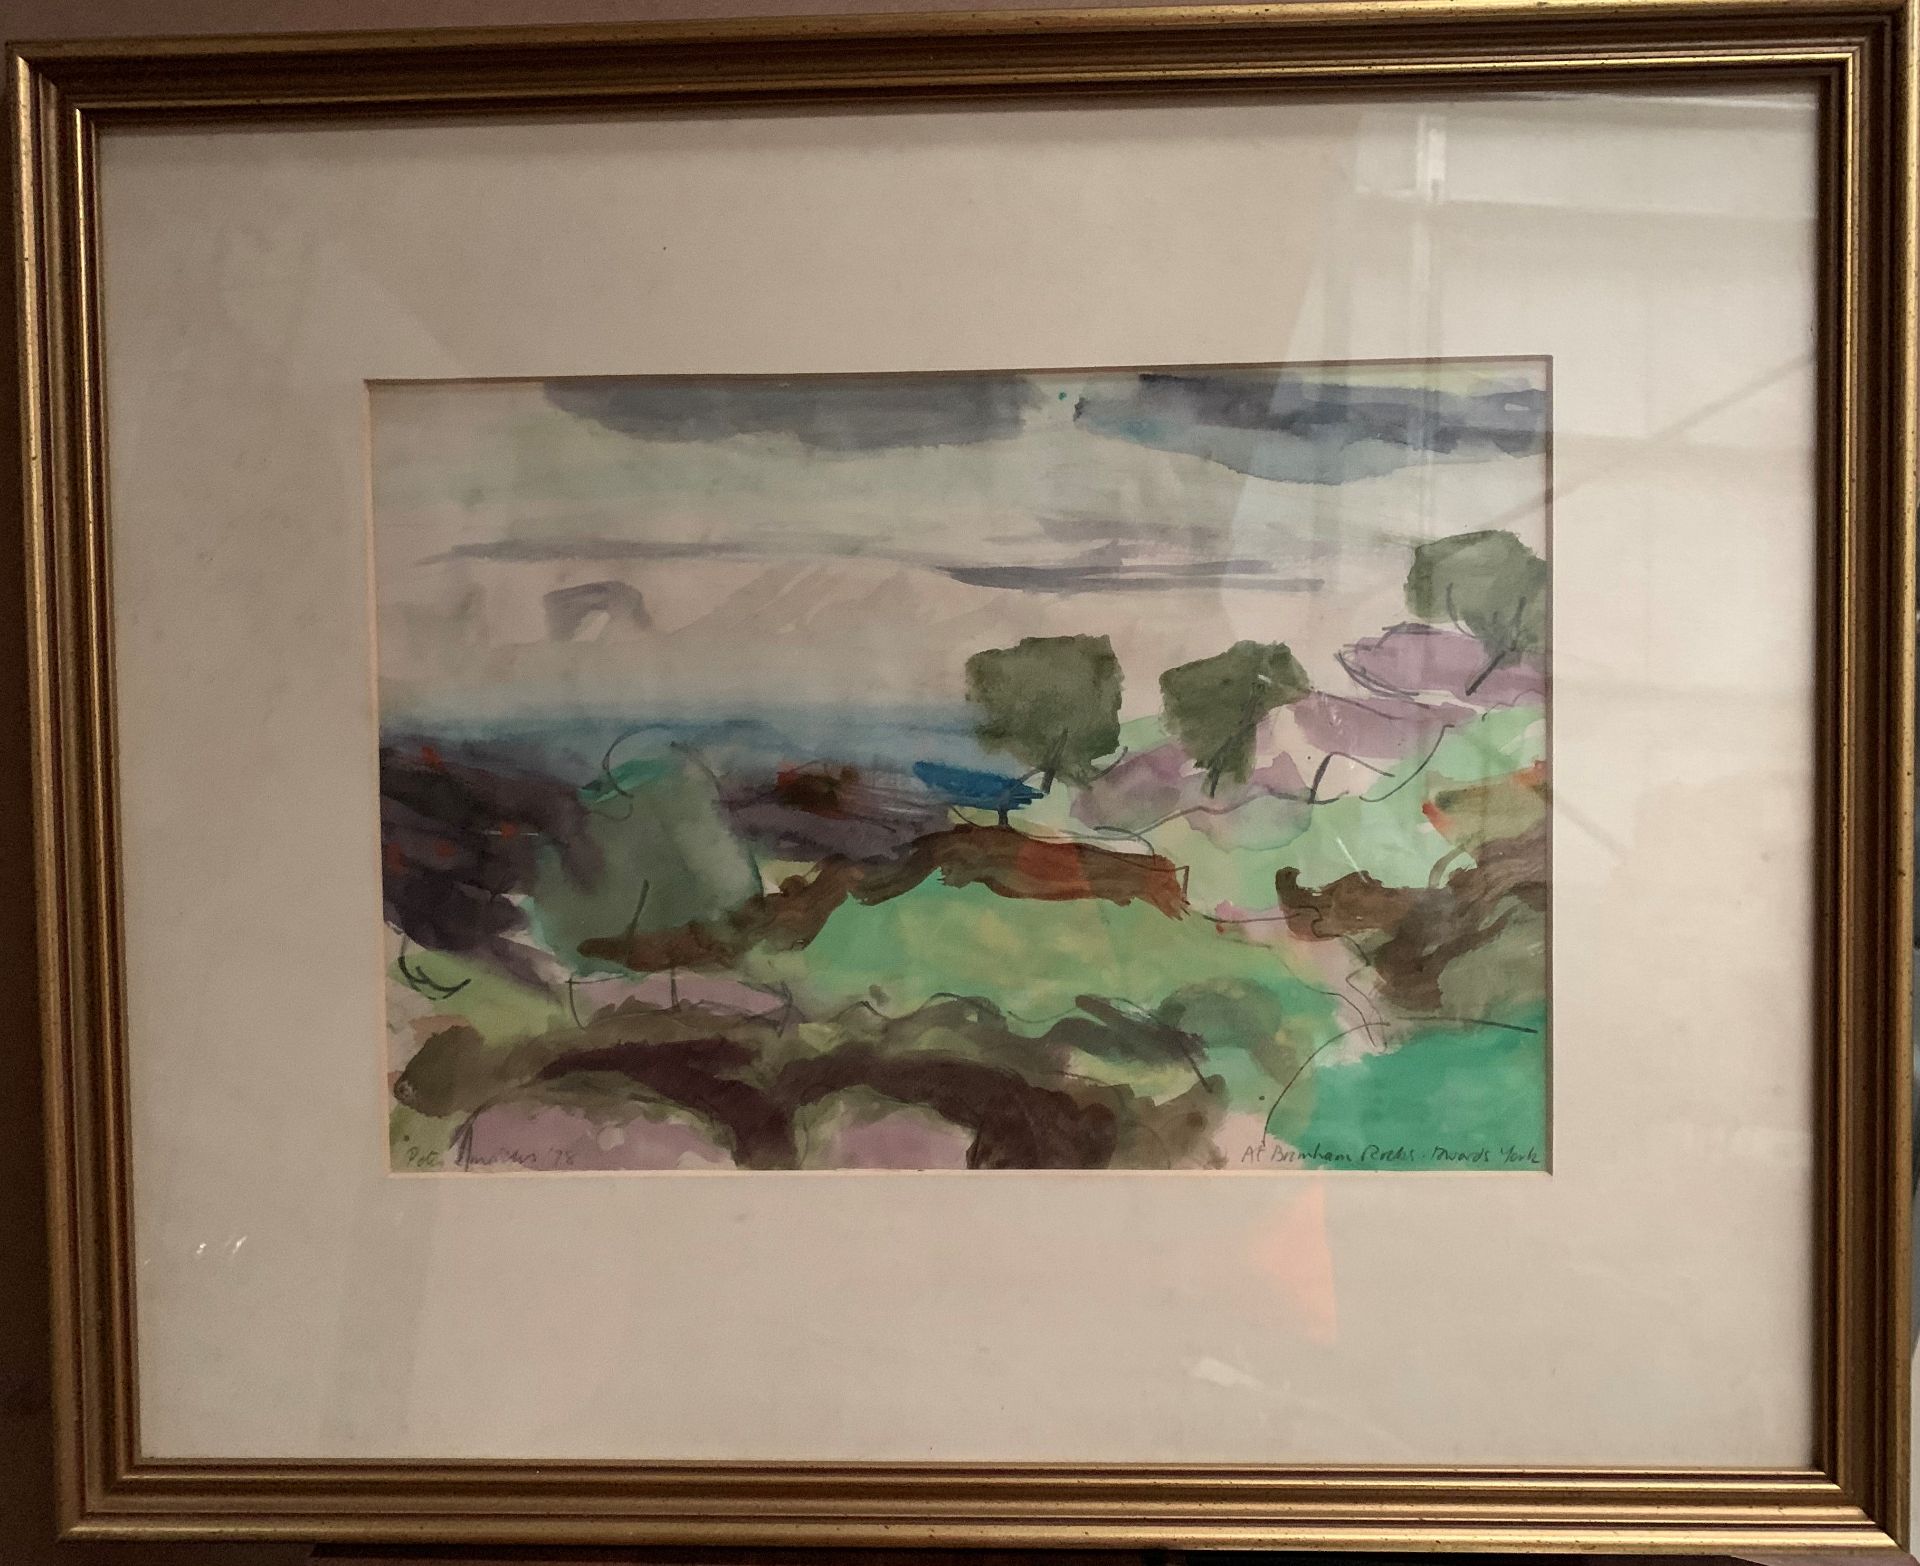 Peter Smailes two framed watercolours 'At Brimham Rocks towards York' 25 x 34cm signed in pencil - Image 2 of 2